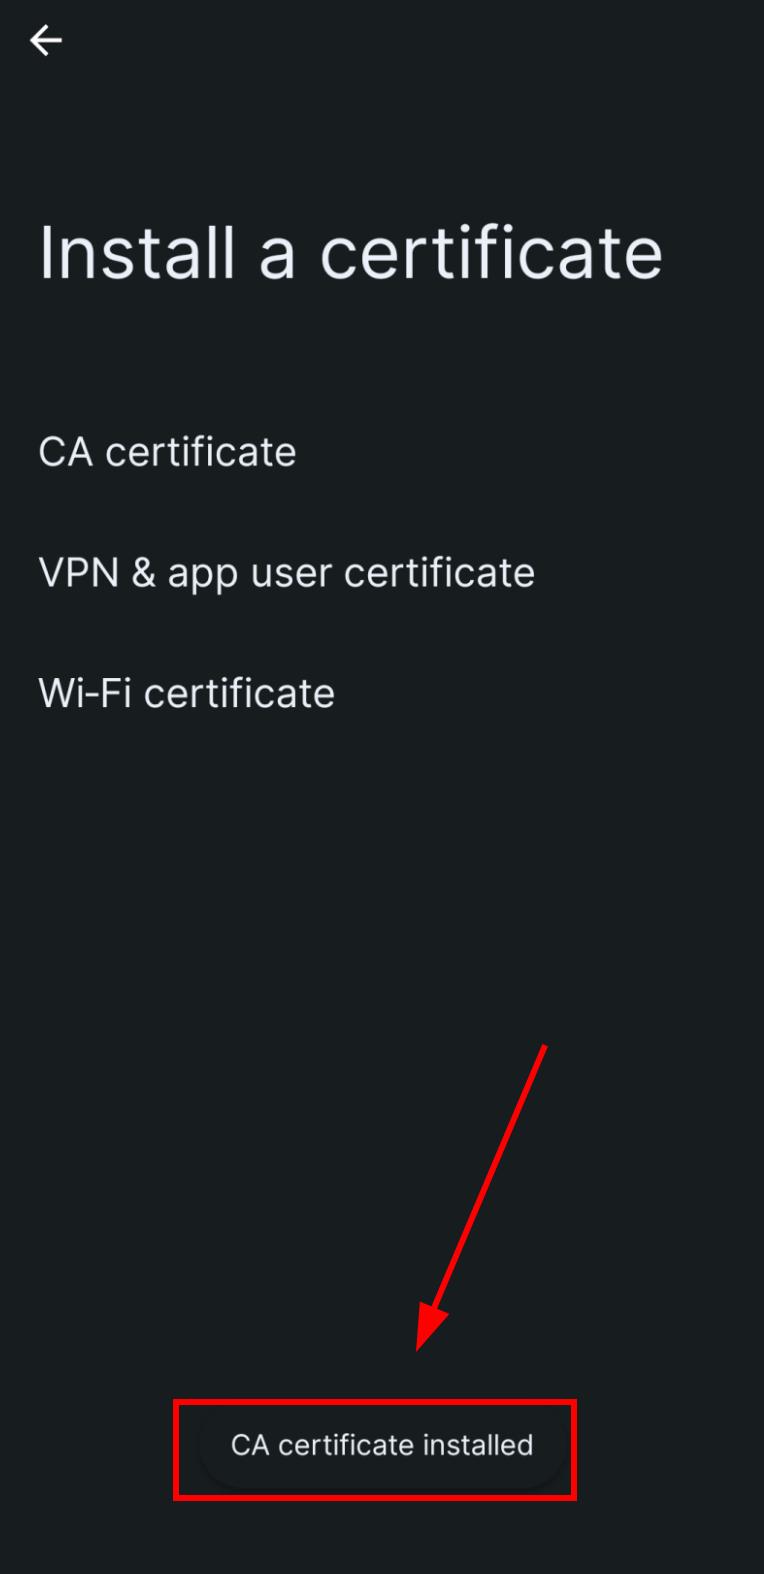 Installed certificate